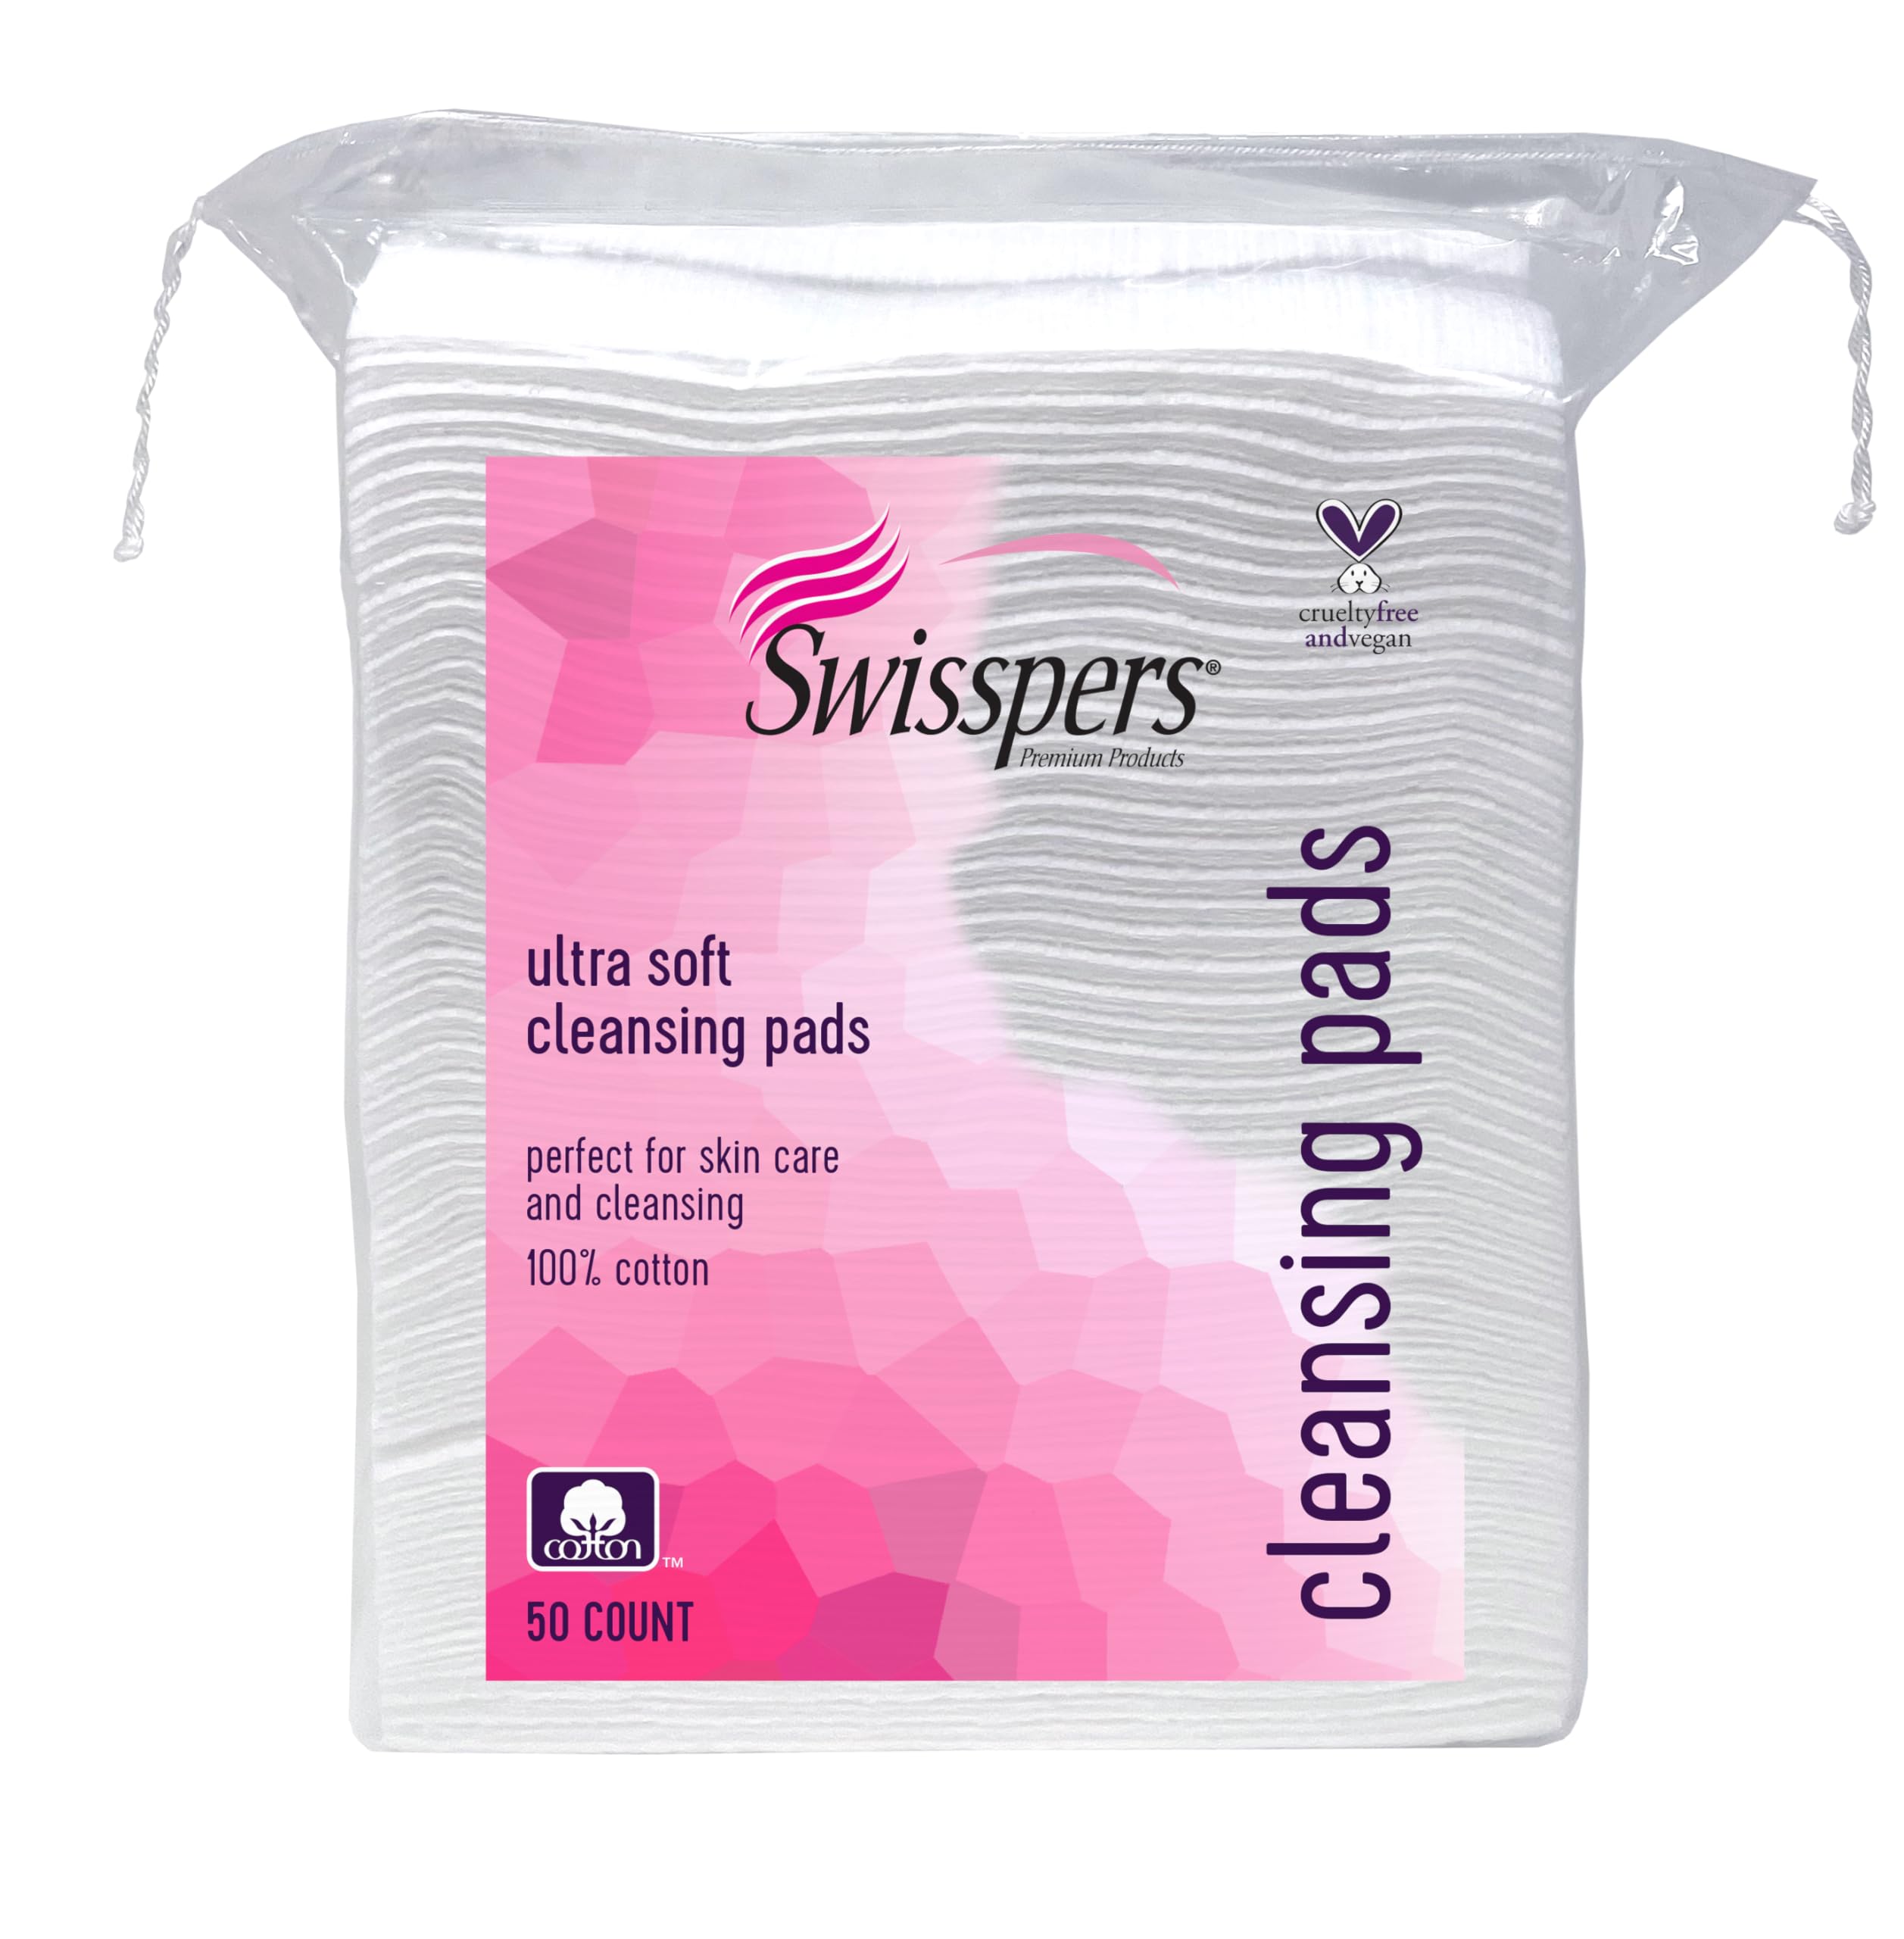 Swisspers Premium Facial Cleansing Pad, 100% Cotton, Ultra Soft, Extra Large, 50 White Pads per Reclosable Bag, 3 Bags (150 Pads Total)